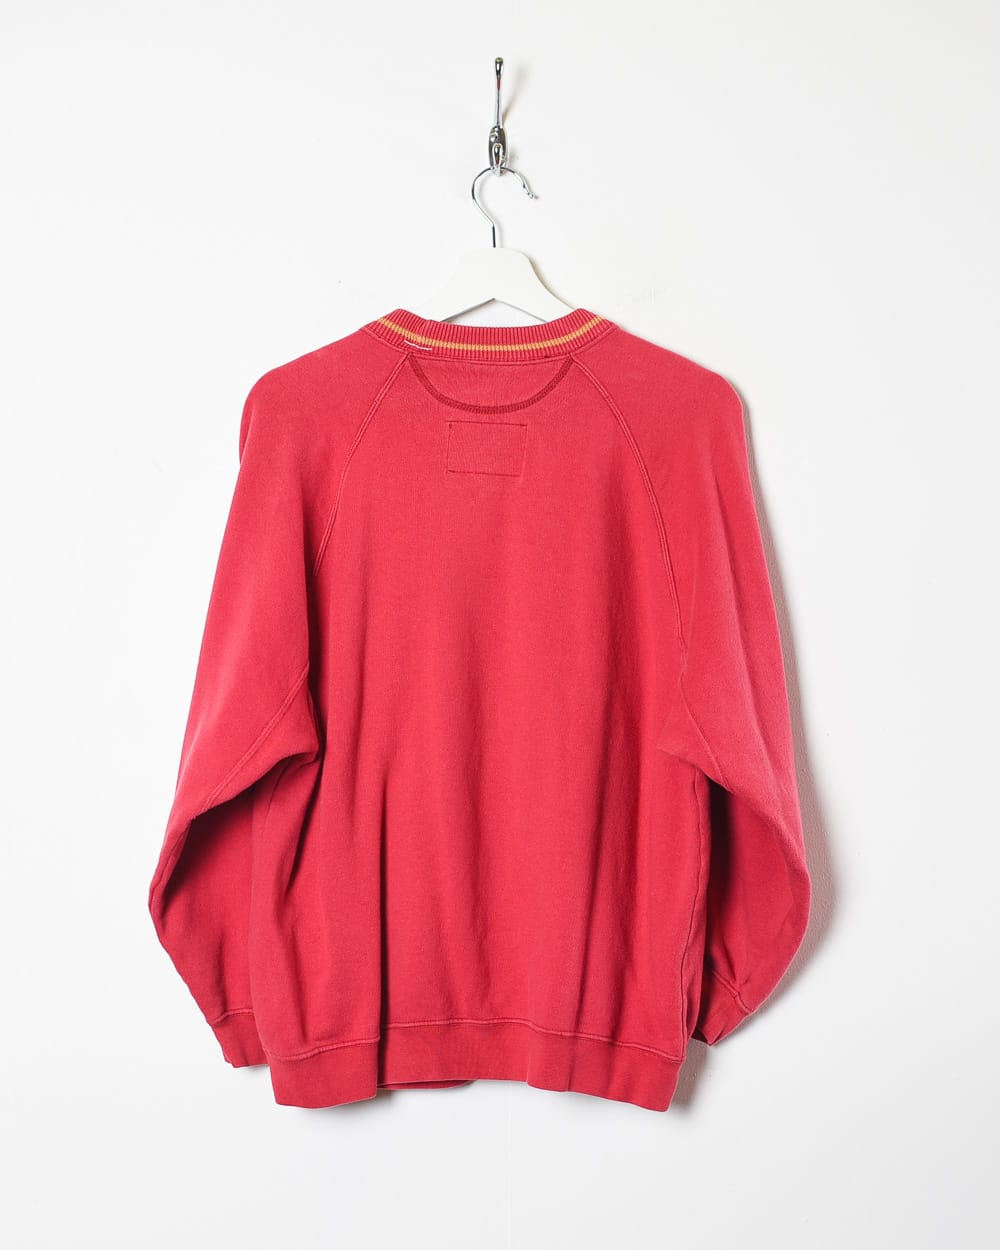 Red Levi's Best Basics The Choice Of Quality Sweatshirt - Small